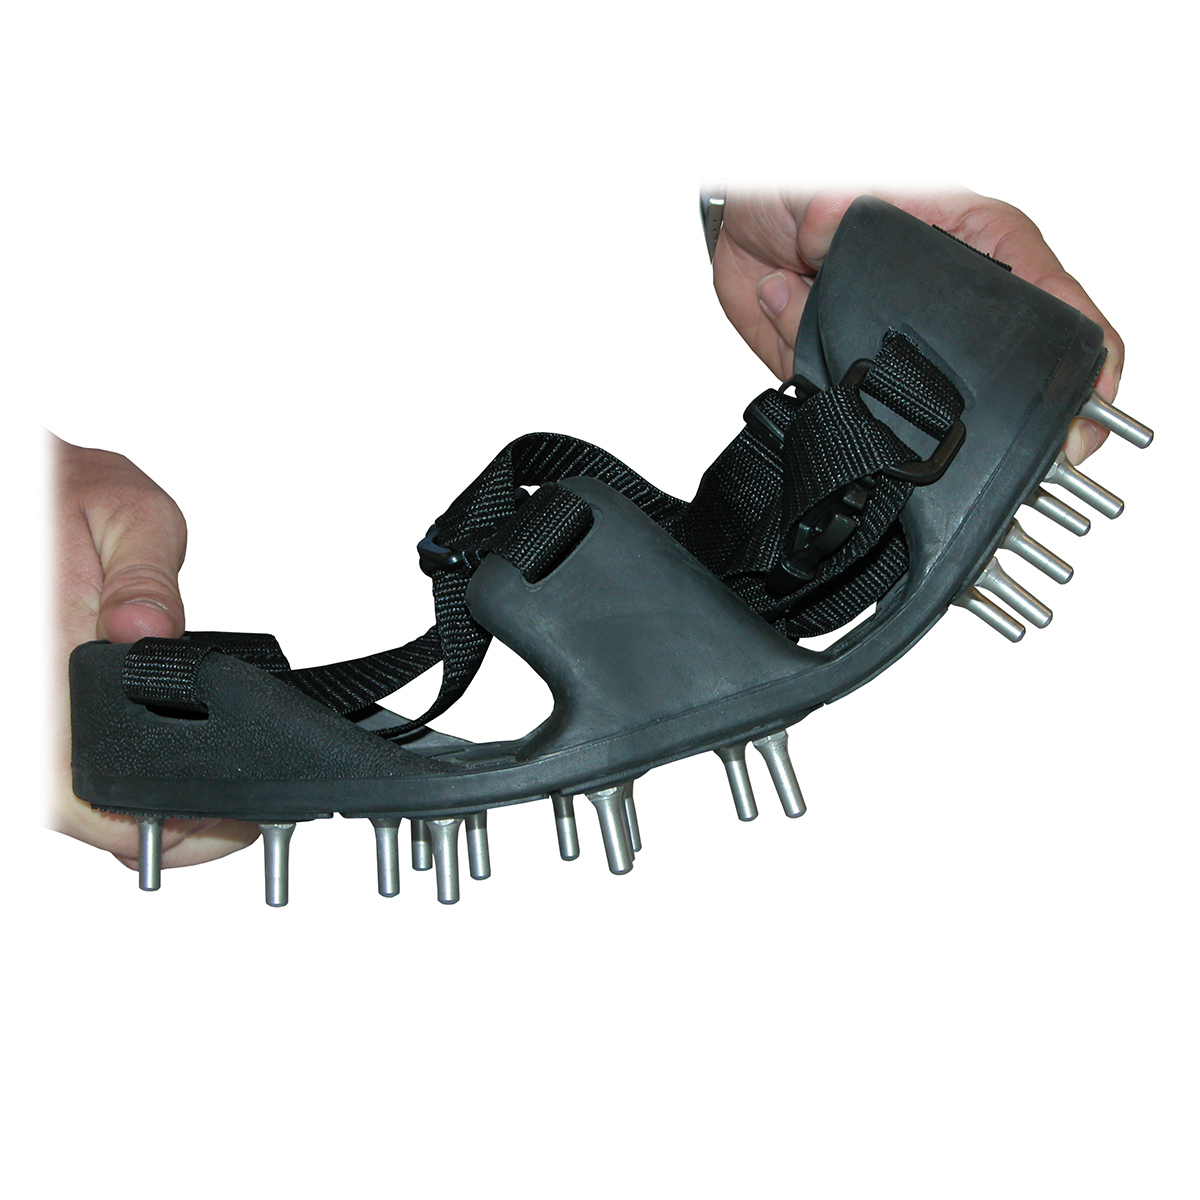 Flexible Bed Spiked Shoes with 7/8 Rounded Tip Spikes - M (Shoe